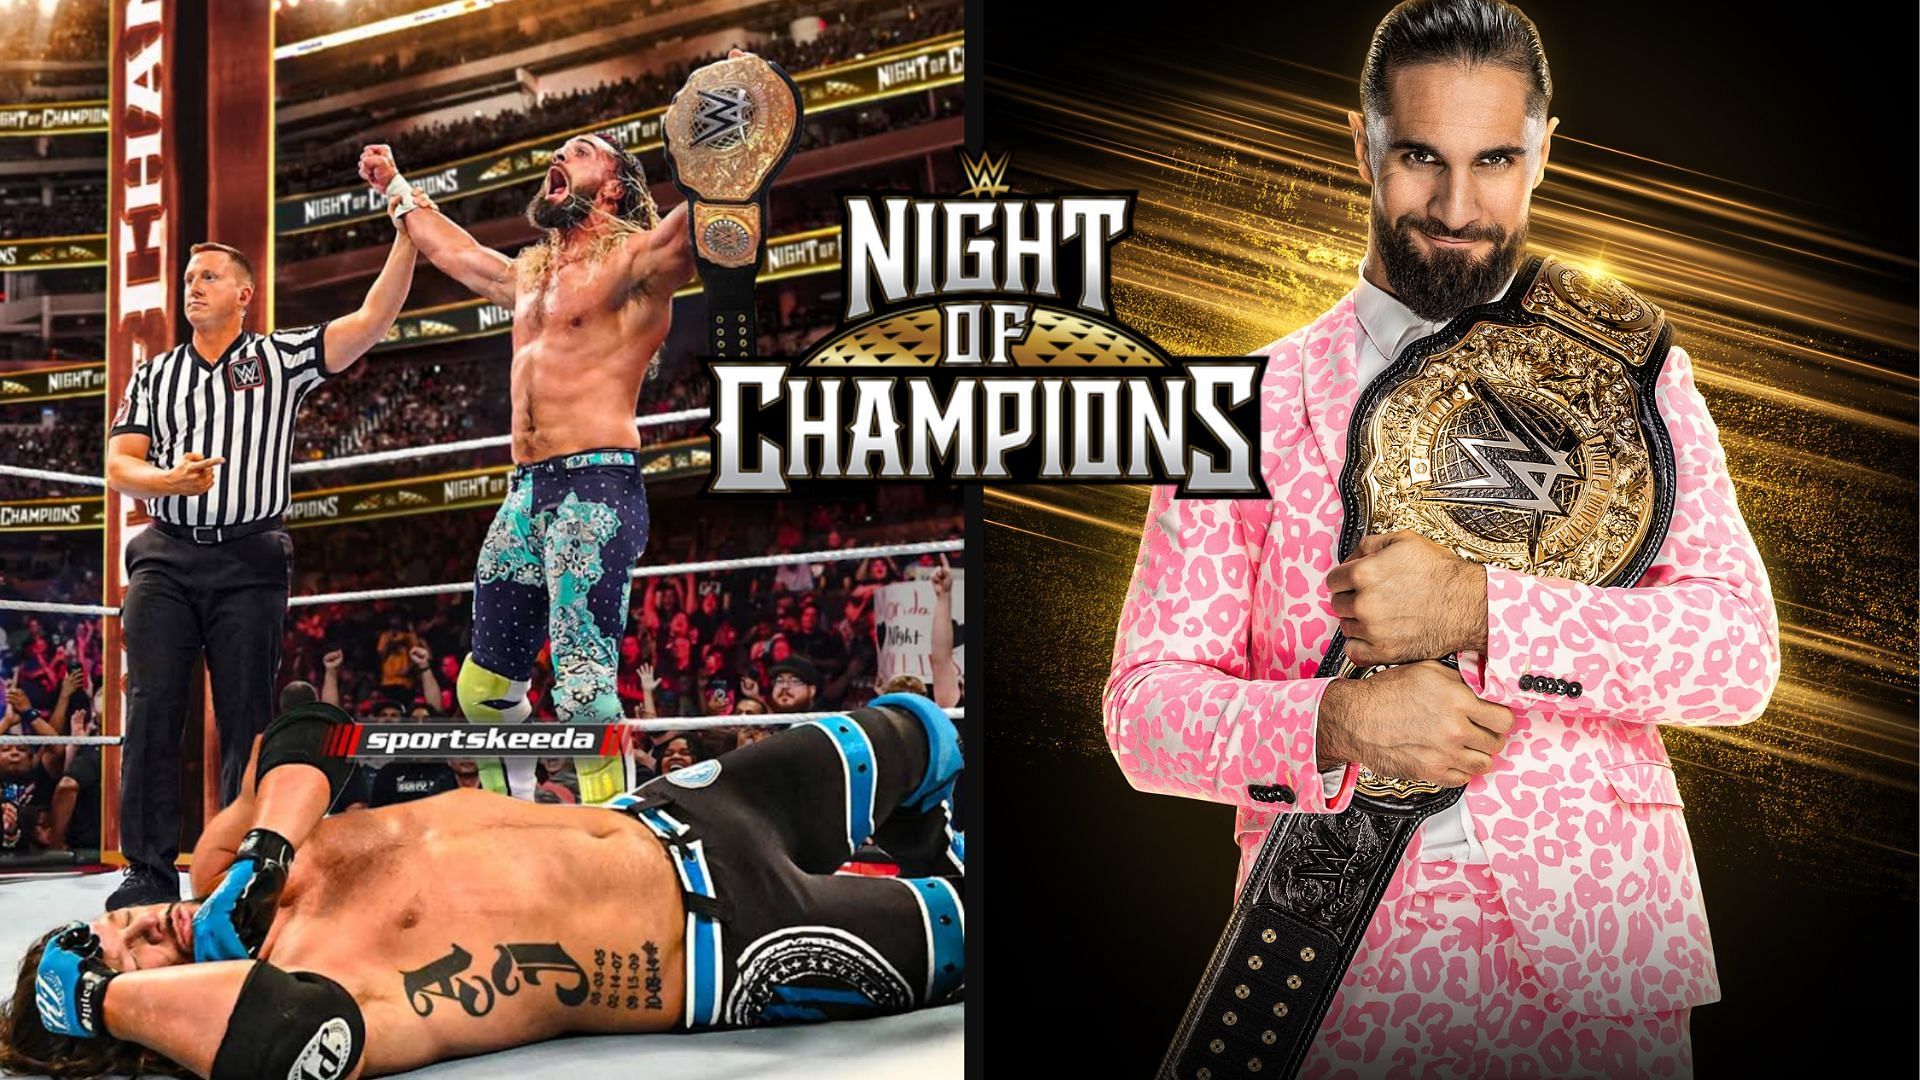 Seth Rollins is the favorite to win at WWE Night of Champions 2023 due to many reasons